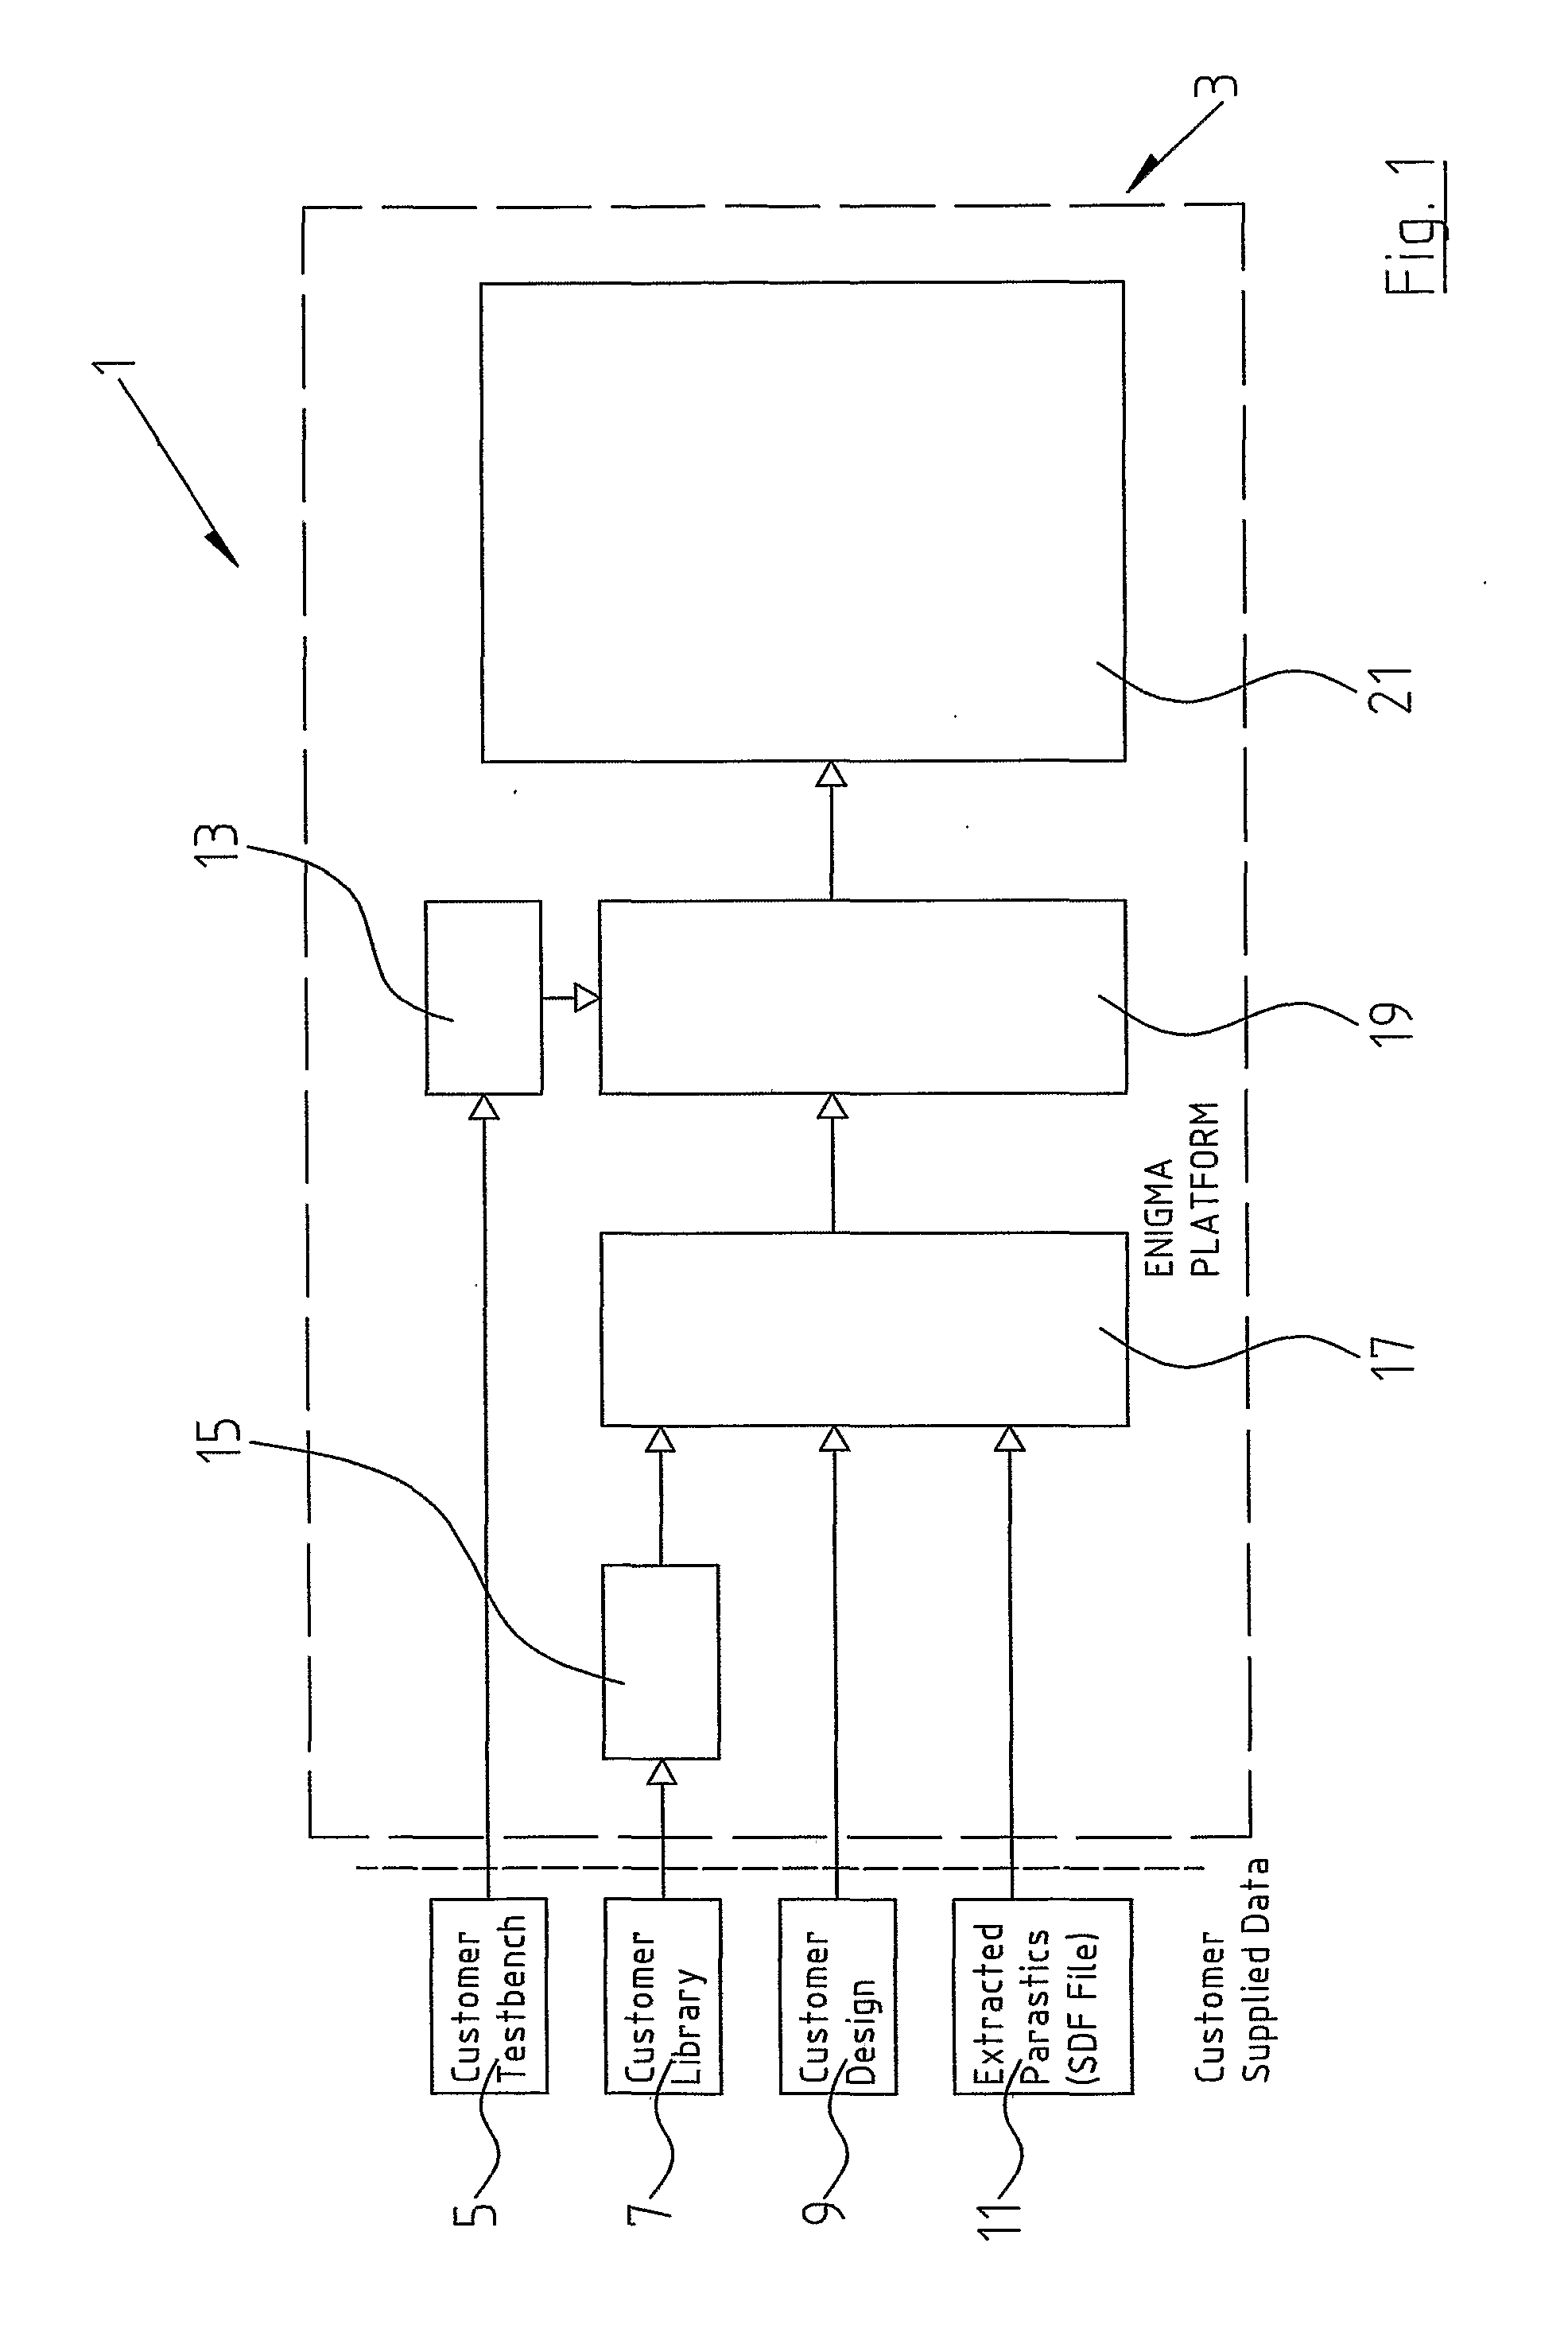 Method and Processor for Power Analysis in Digital Circuits